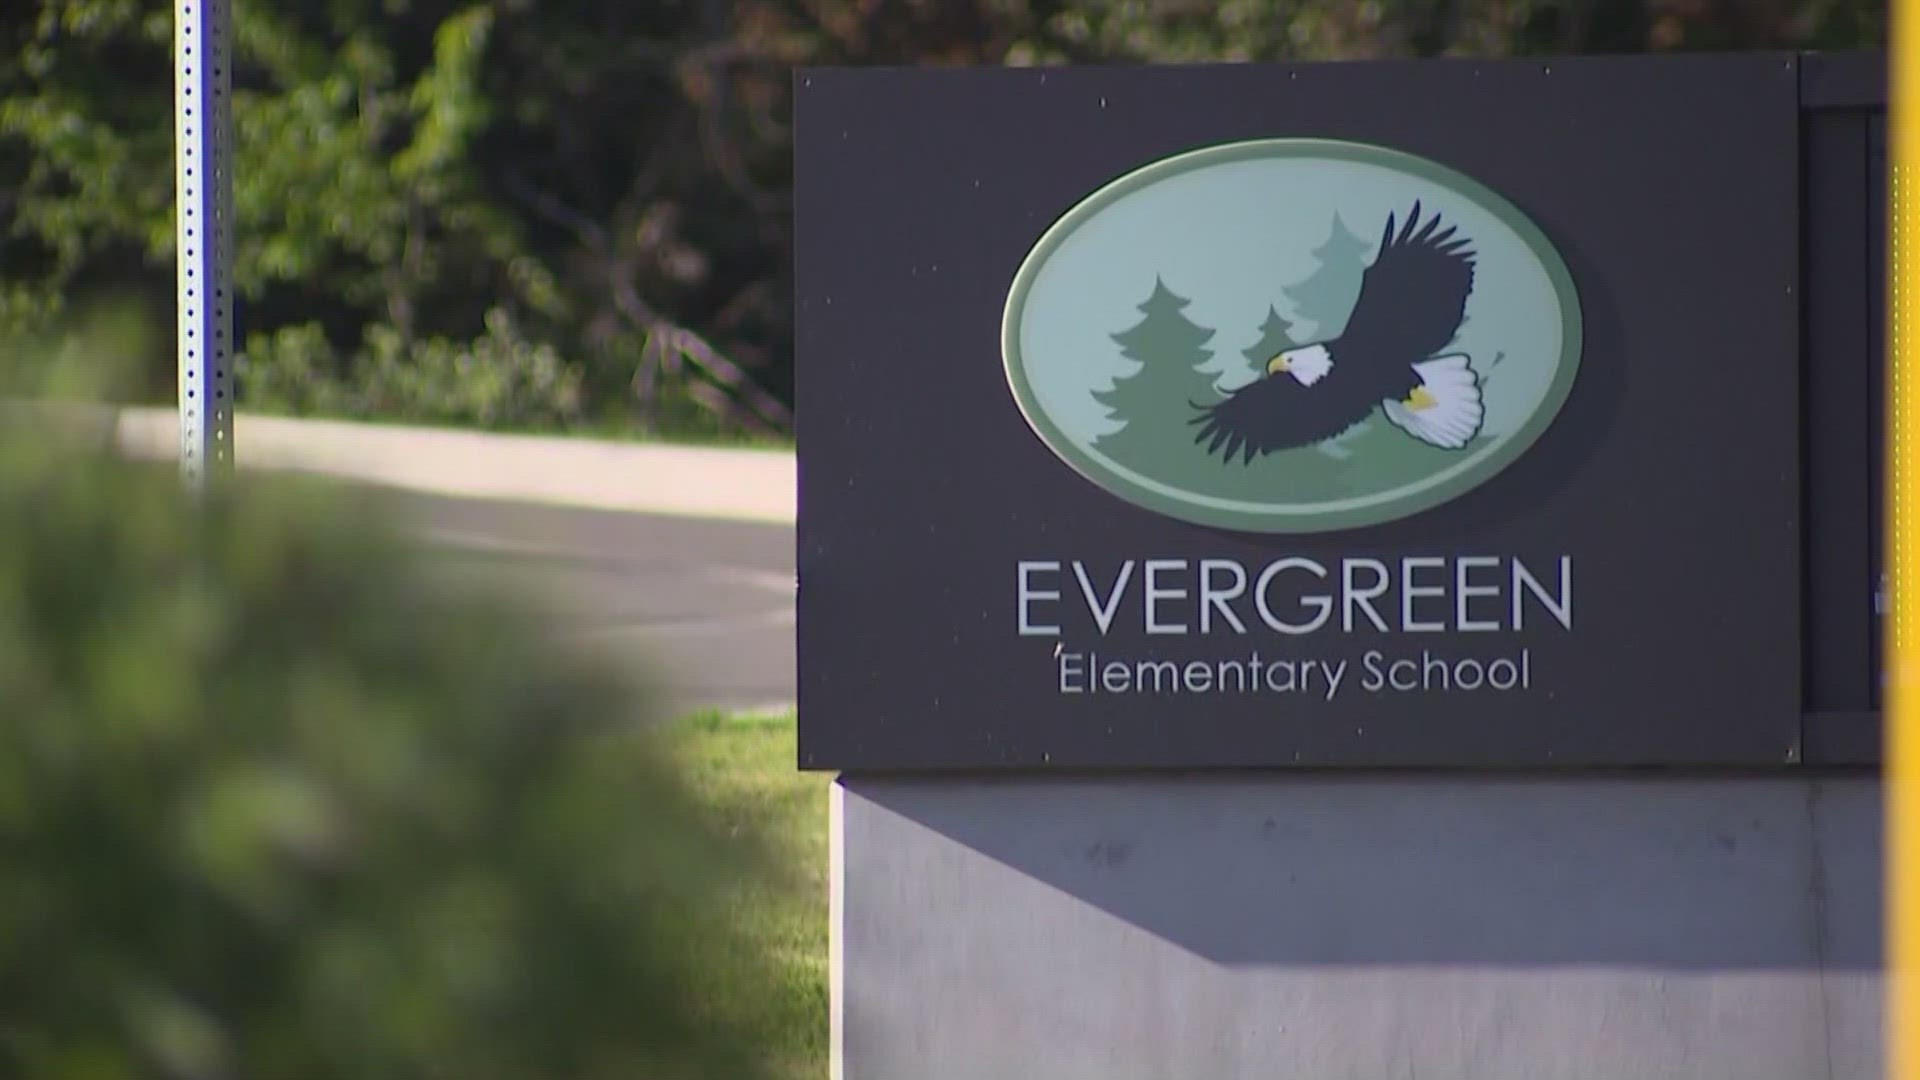 A former teacher at Evergreen Elementary school in Lakebay is facing eight counts of child molestation